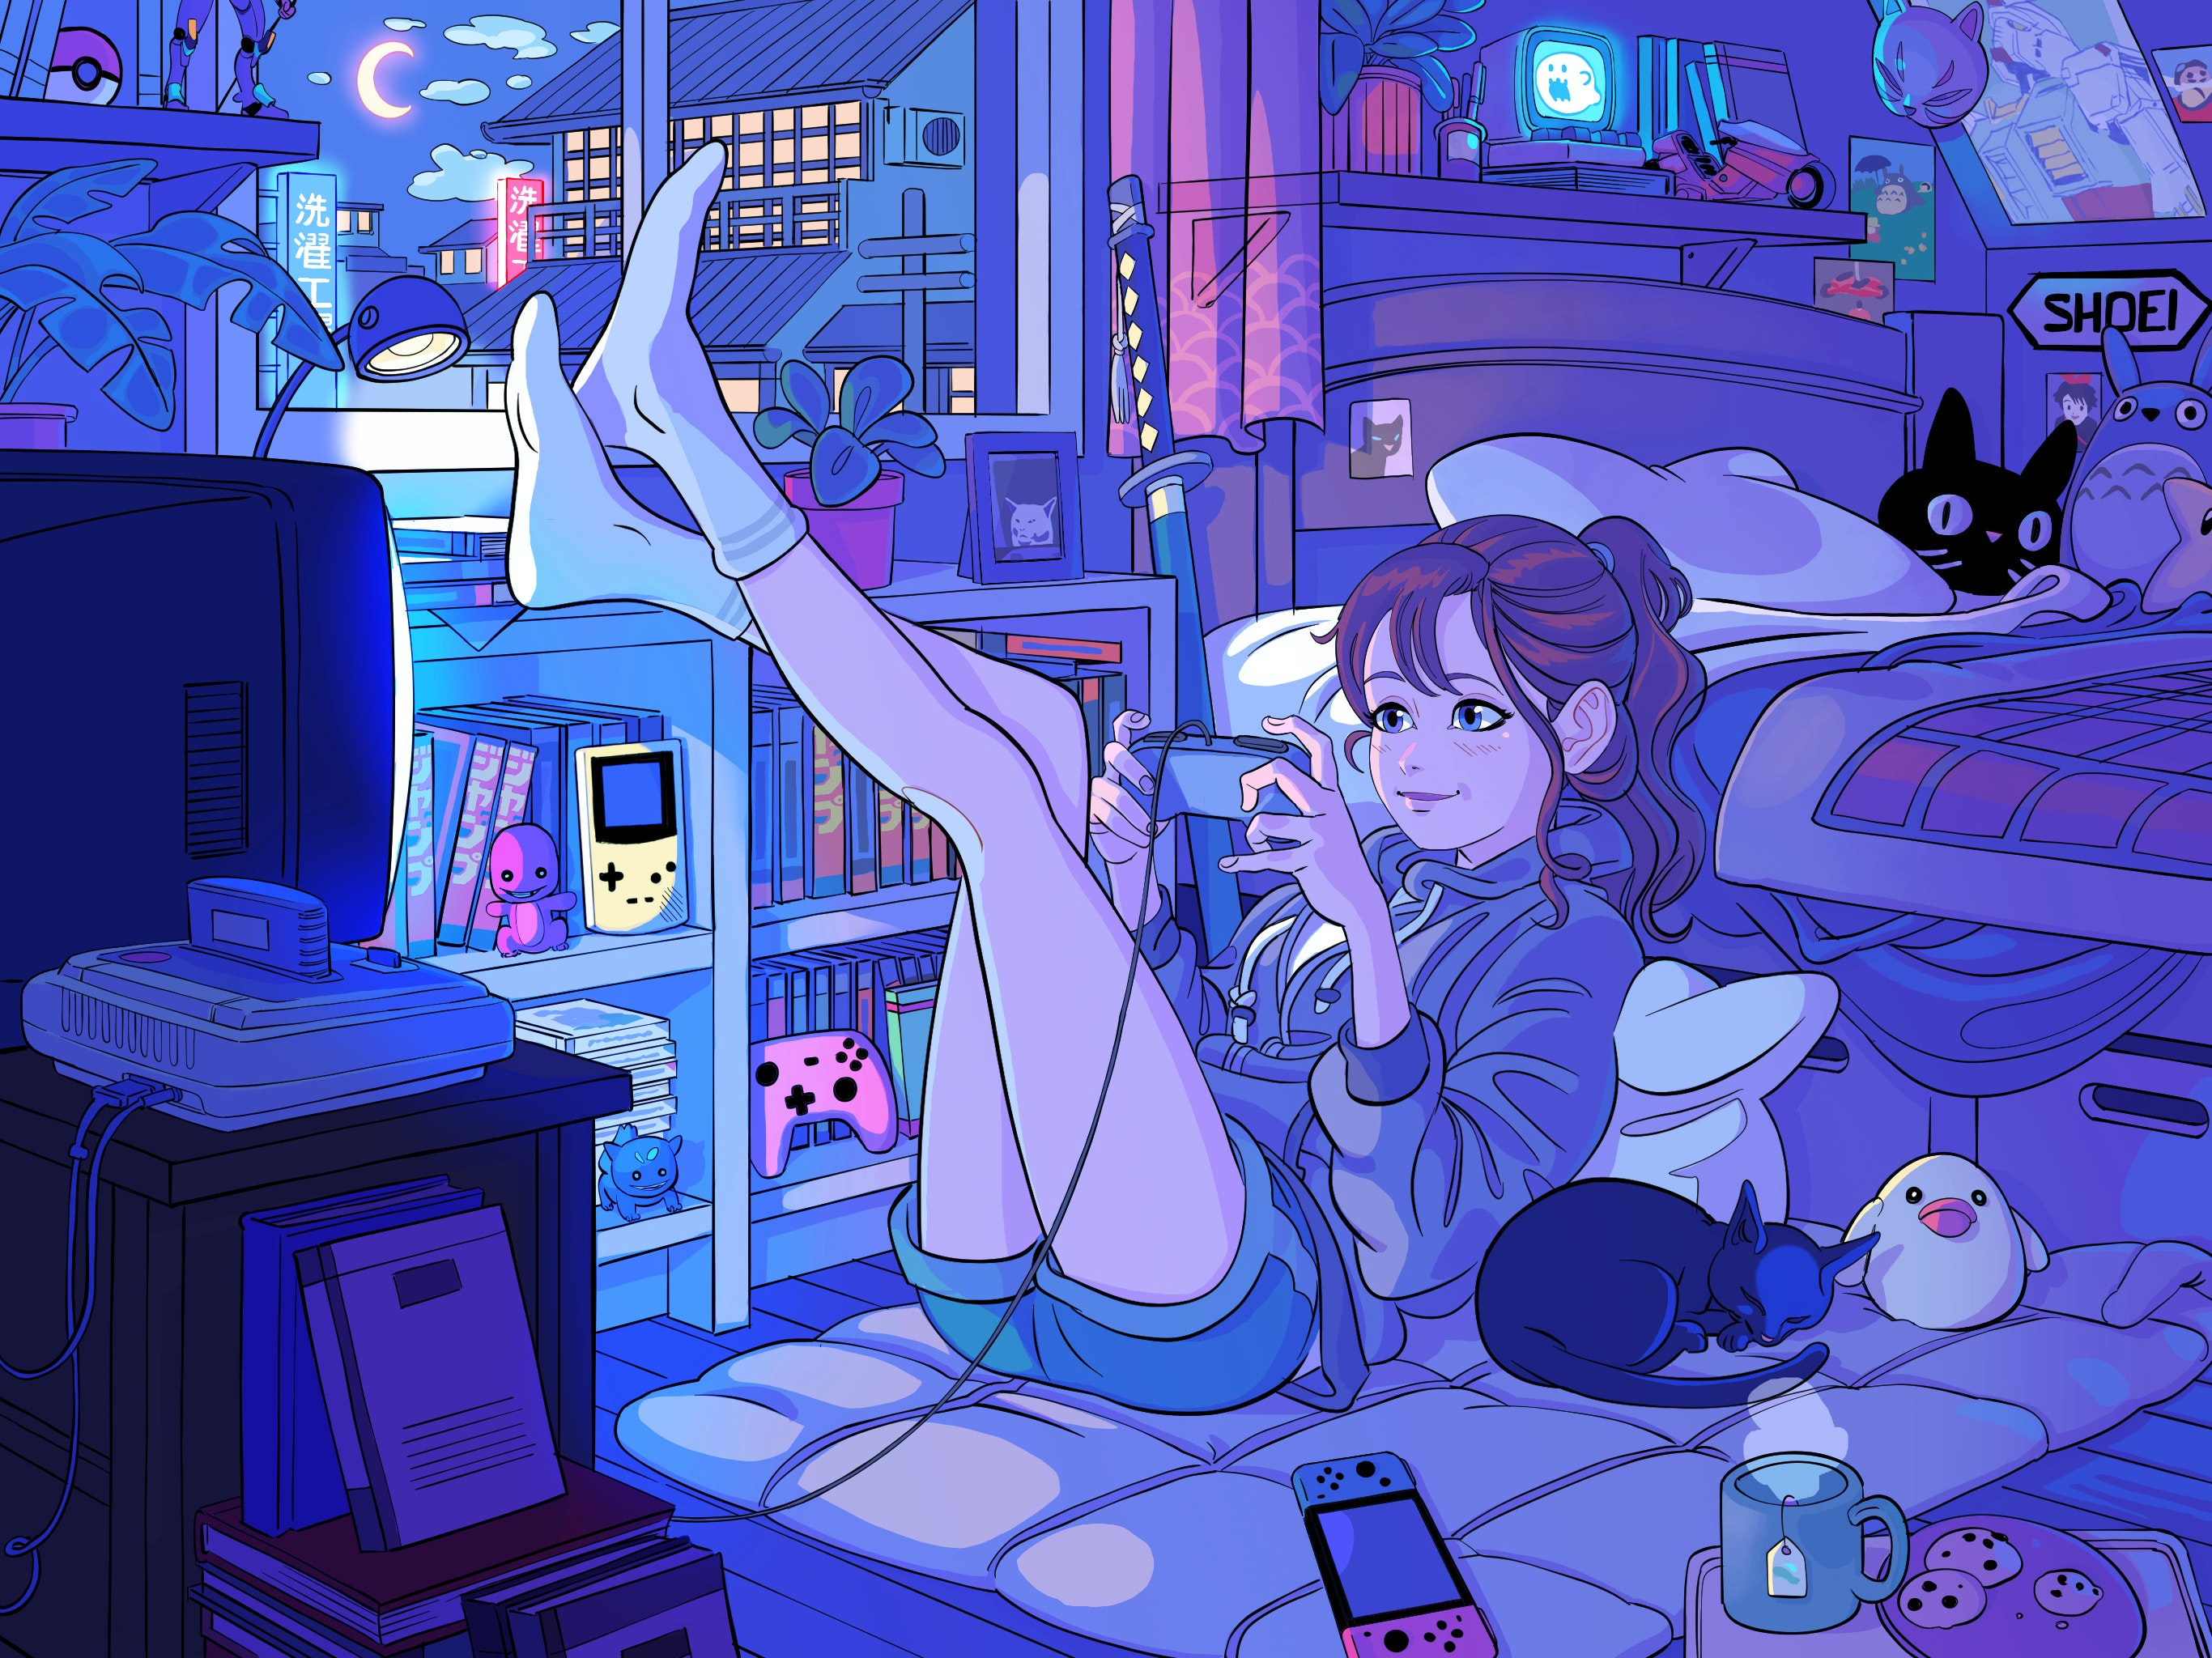 General 2732x2048 Chris Alliel digital art artwork illustration women blue room indoors environment bed Nintendo Switch GameBoy Color playing cats in bedroom controllers smiling consoles